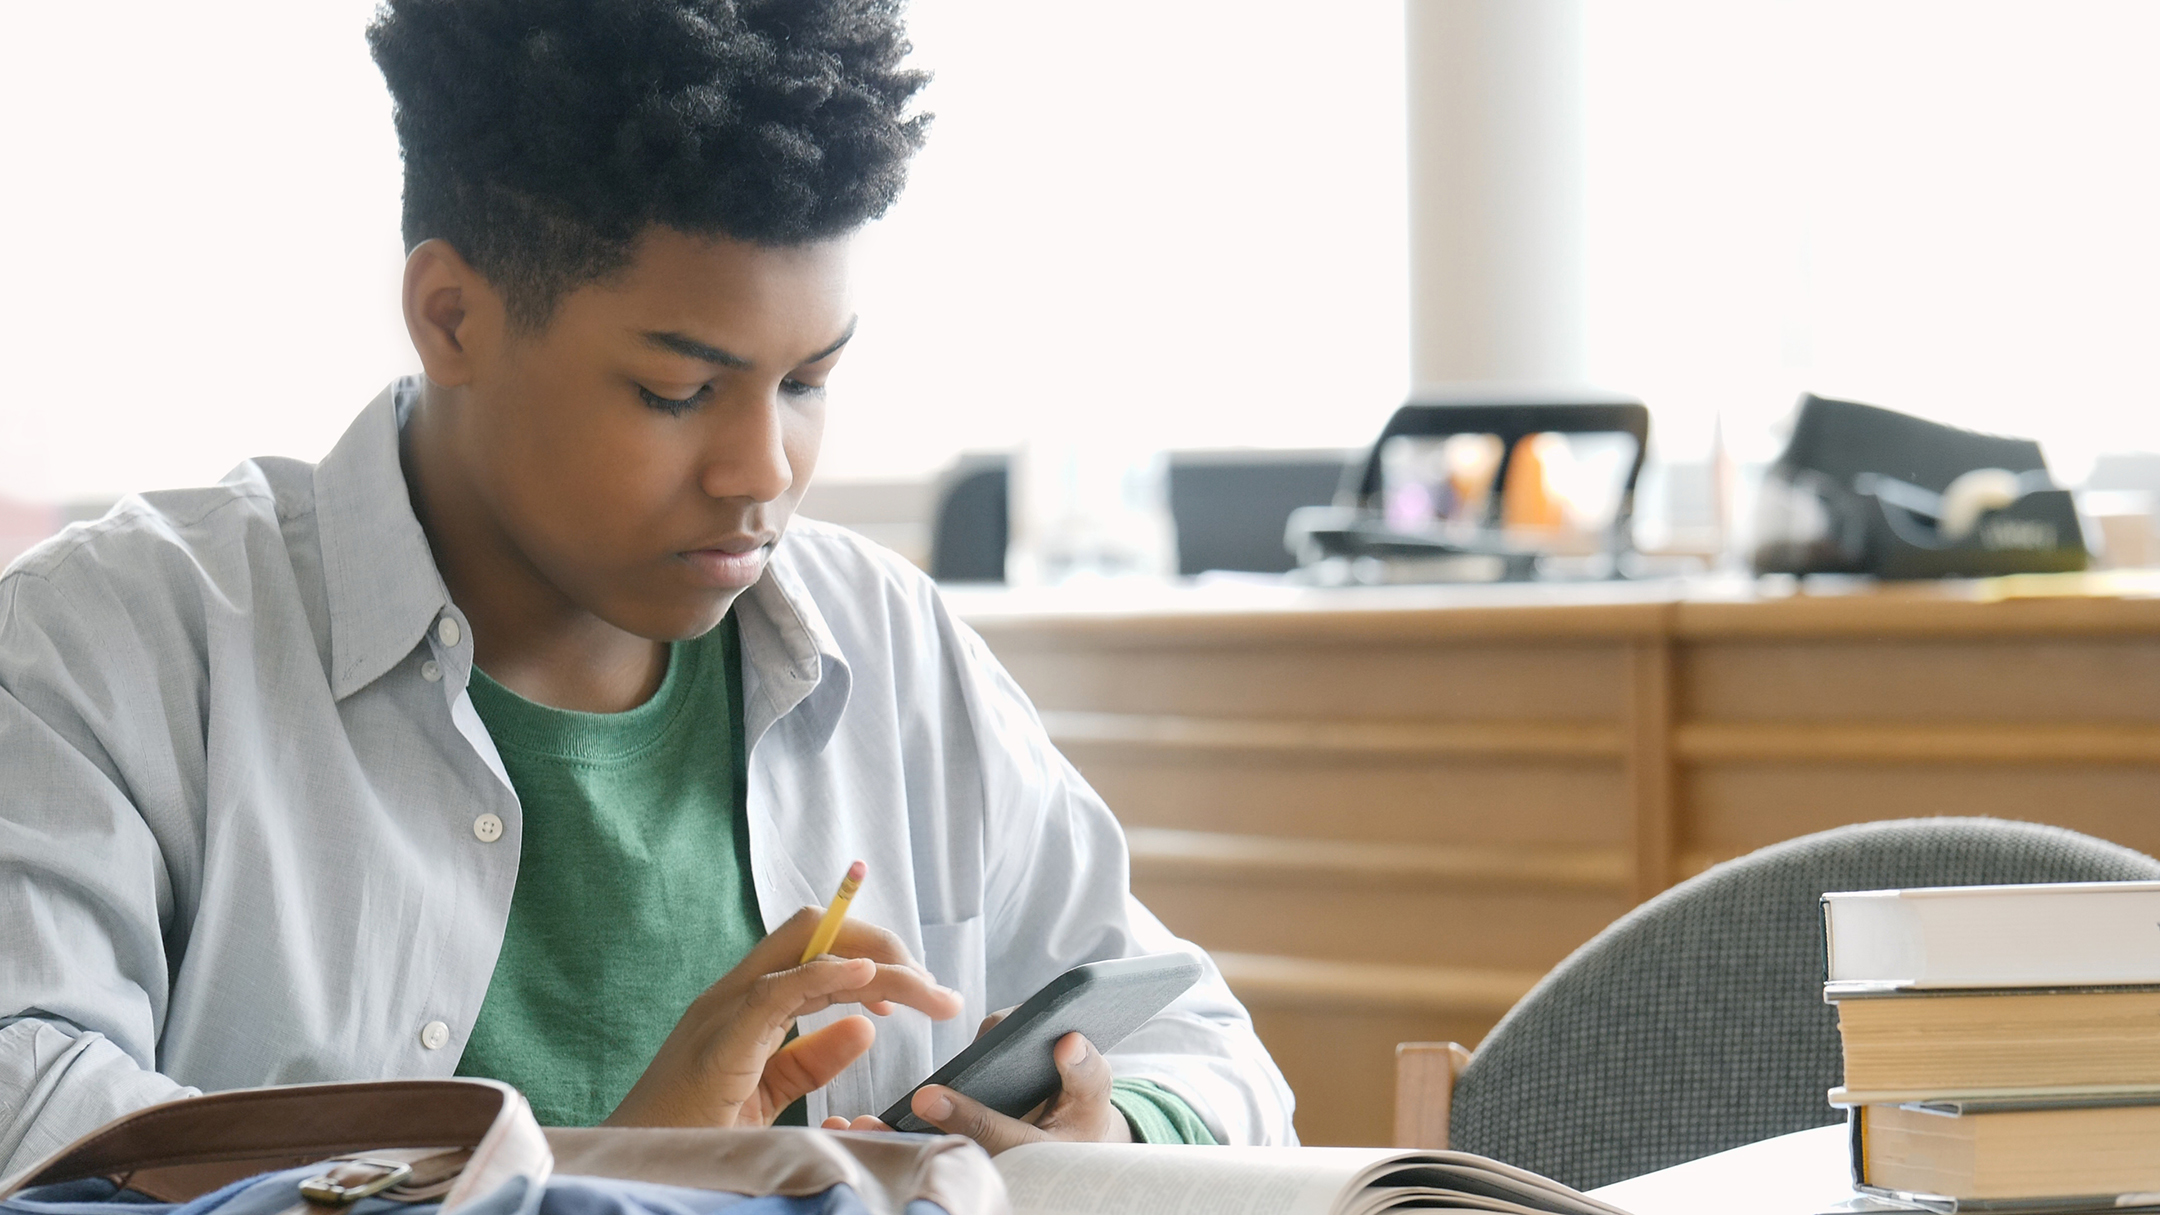 A young Black man looks at his phone wile sitting at a desk with books and homework